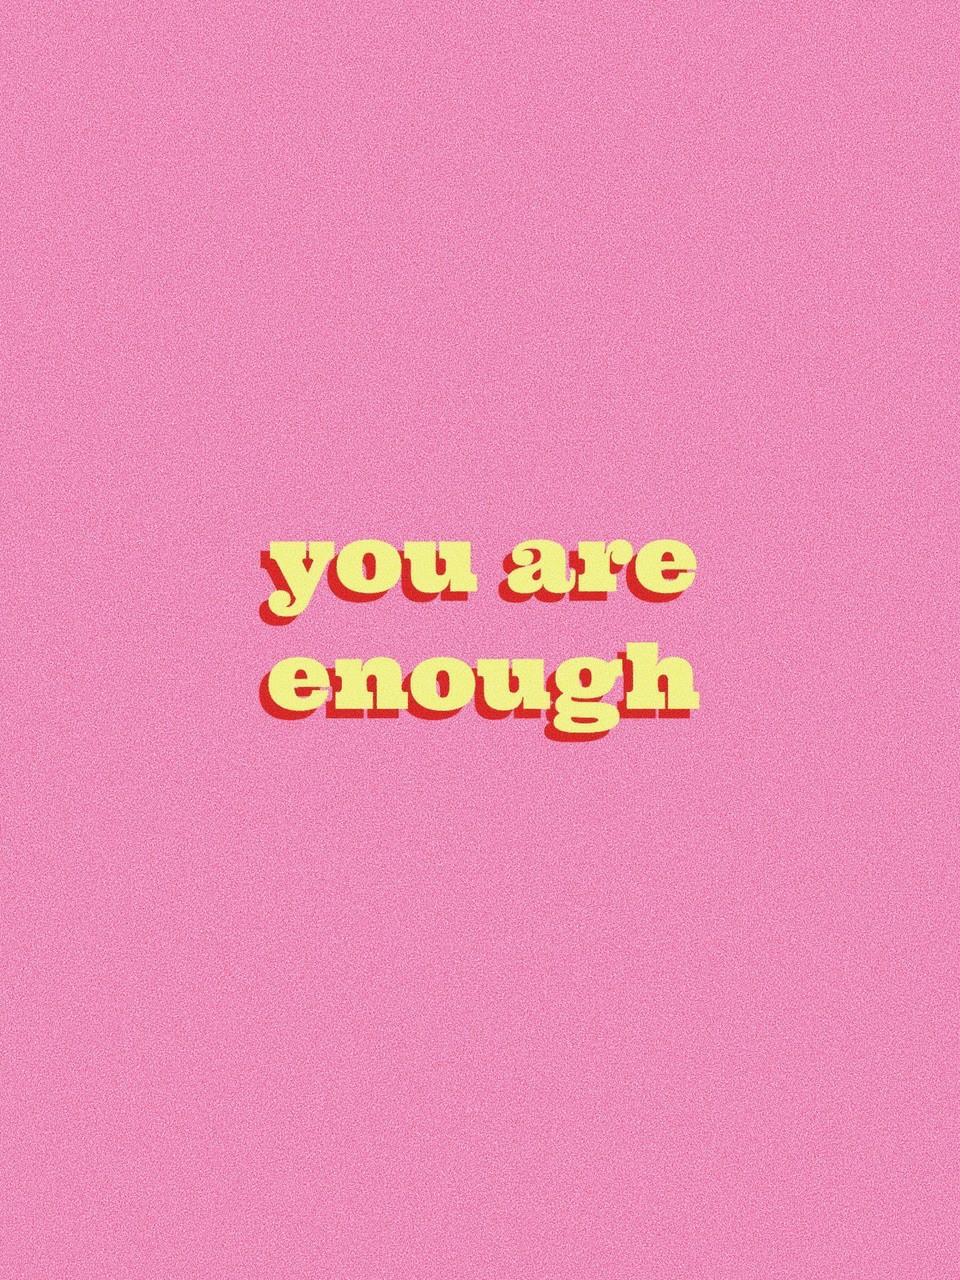 You Are Enough Wallpapers - Top Free You Are Enough Backgrounds ...